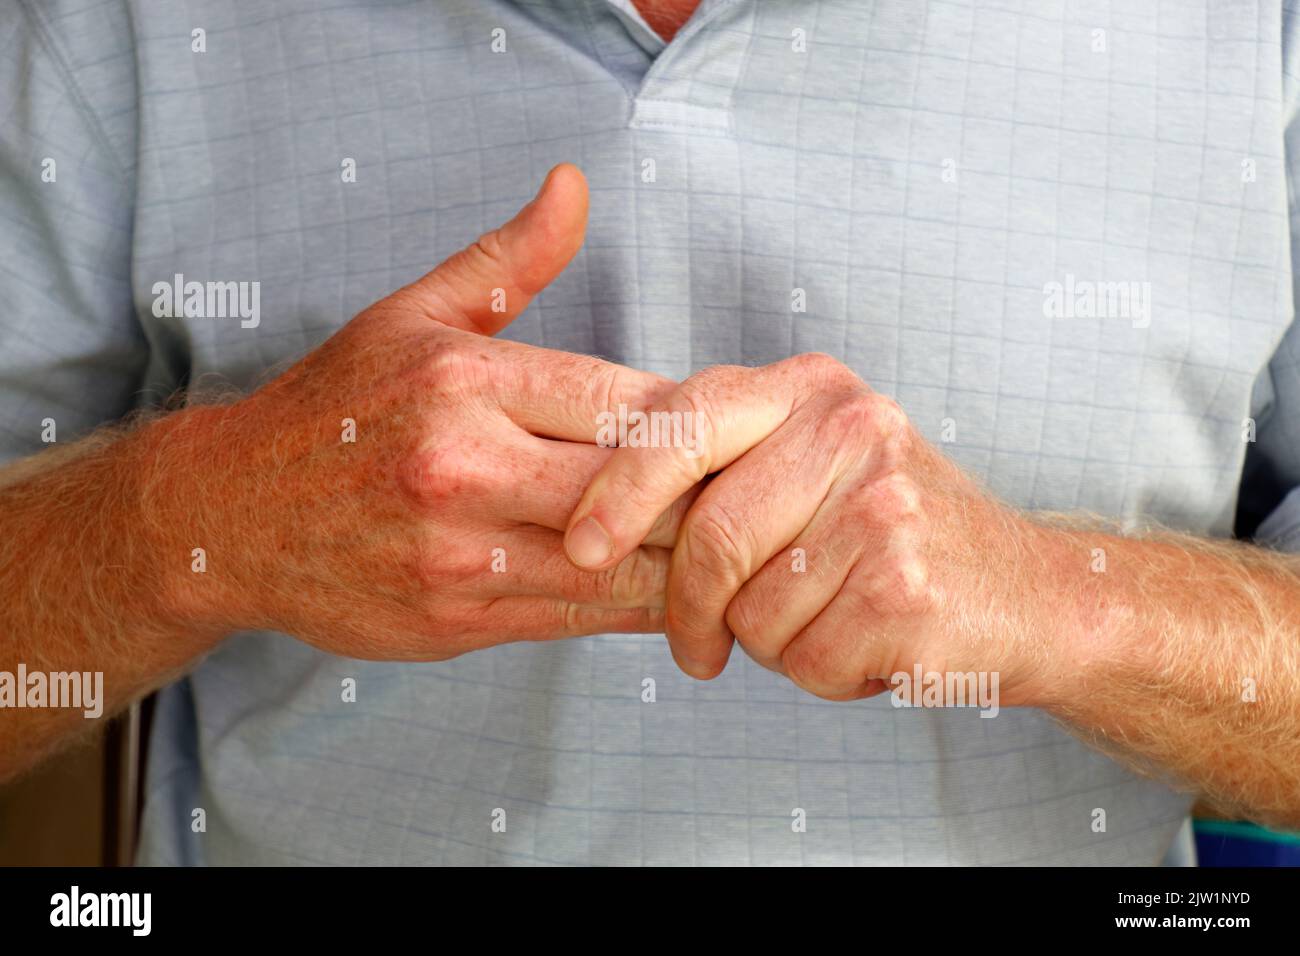 Close-up of mature caucasian males left hand massaging the fingers of his right hand to ease any pain and soreness in muscles and joints. Stock Photo